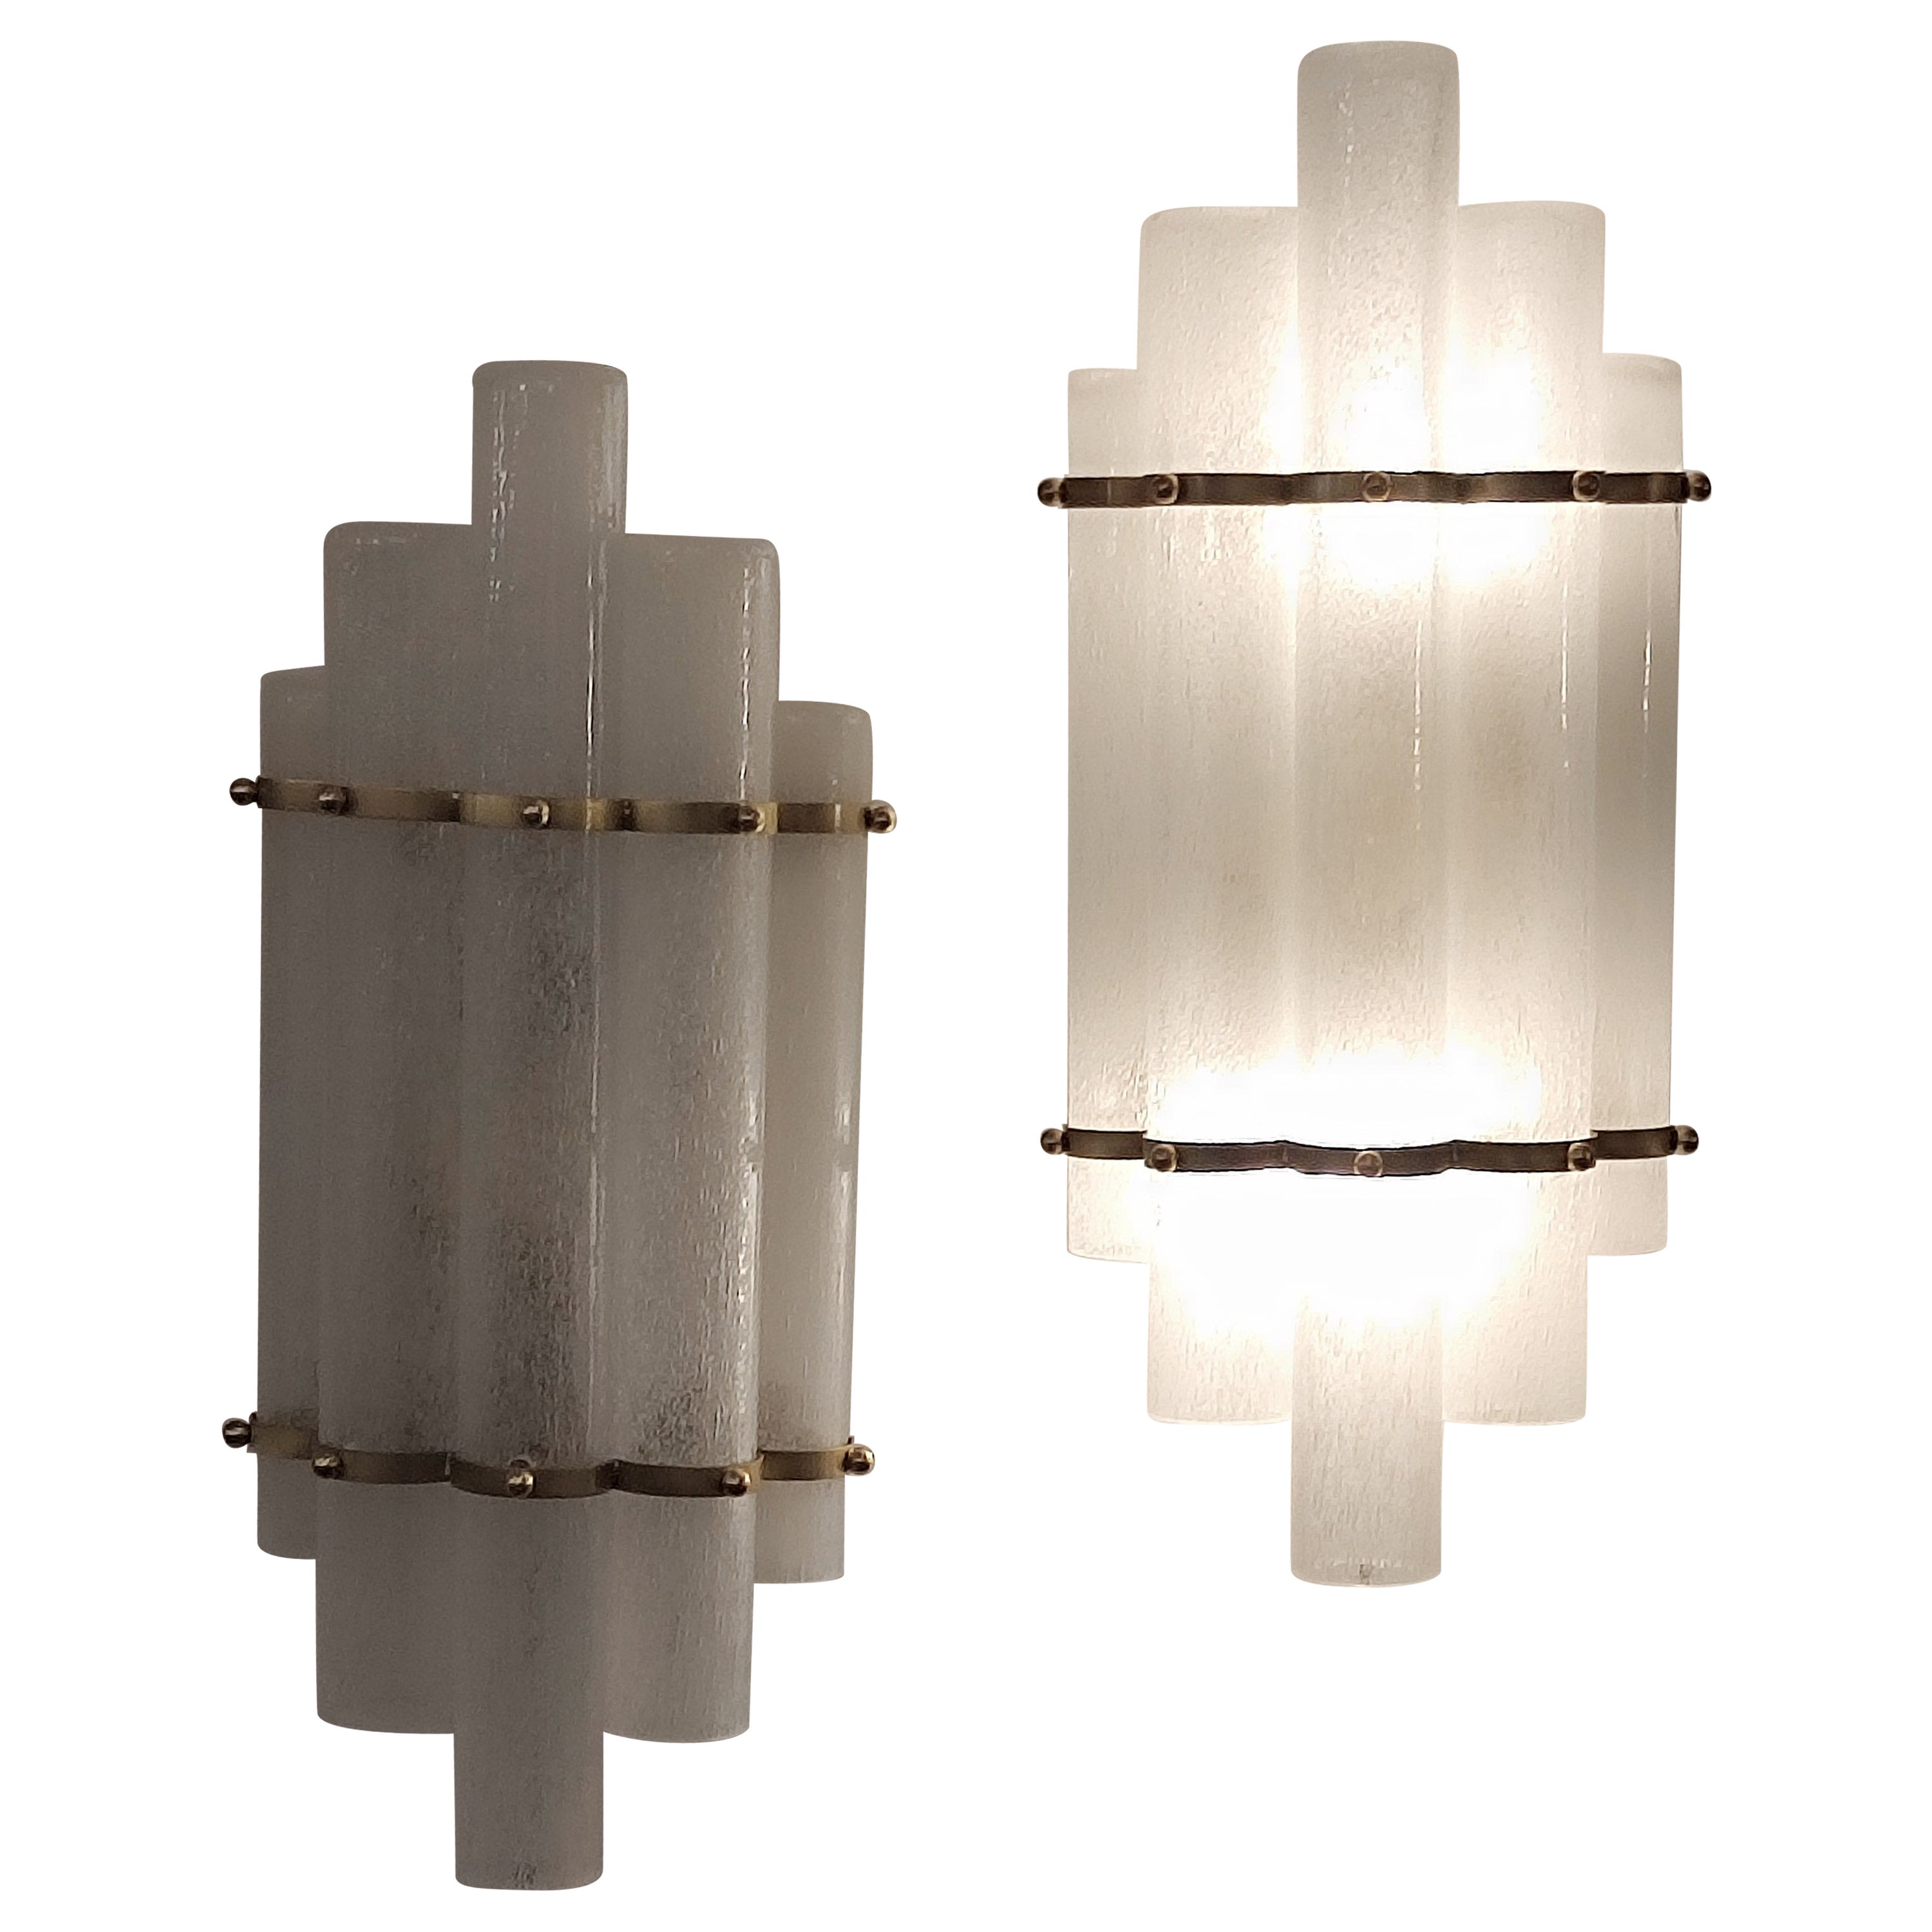 Pair of brass and Murano glass sconces.
2 bulbs E14